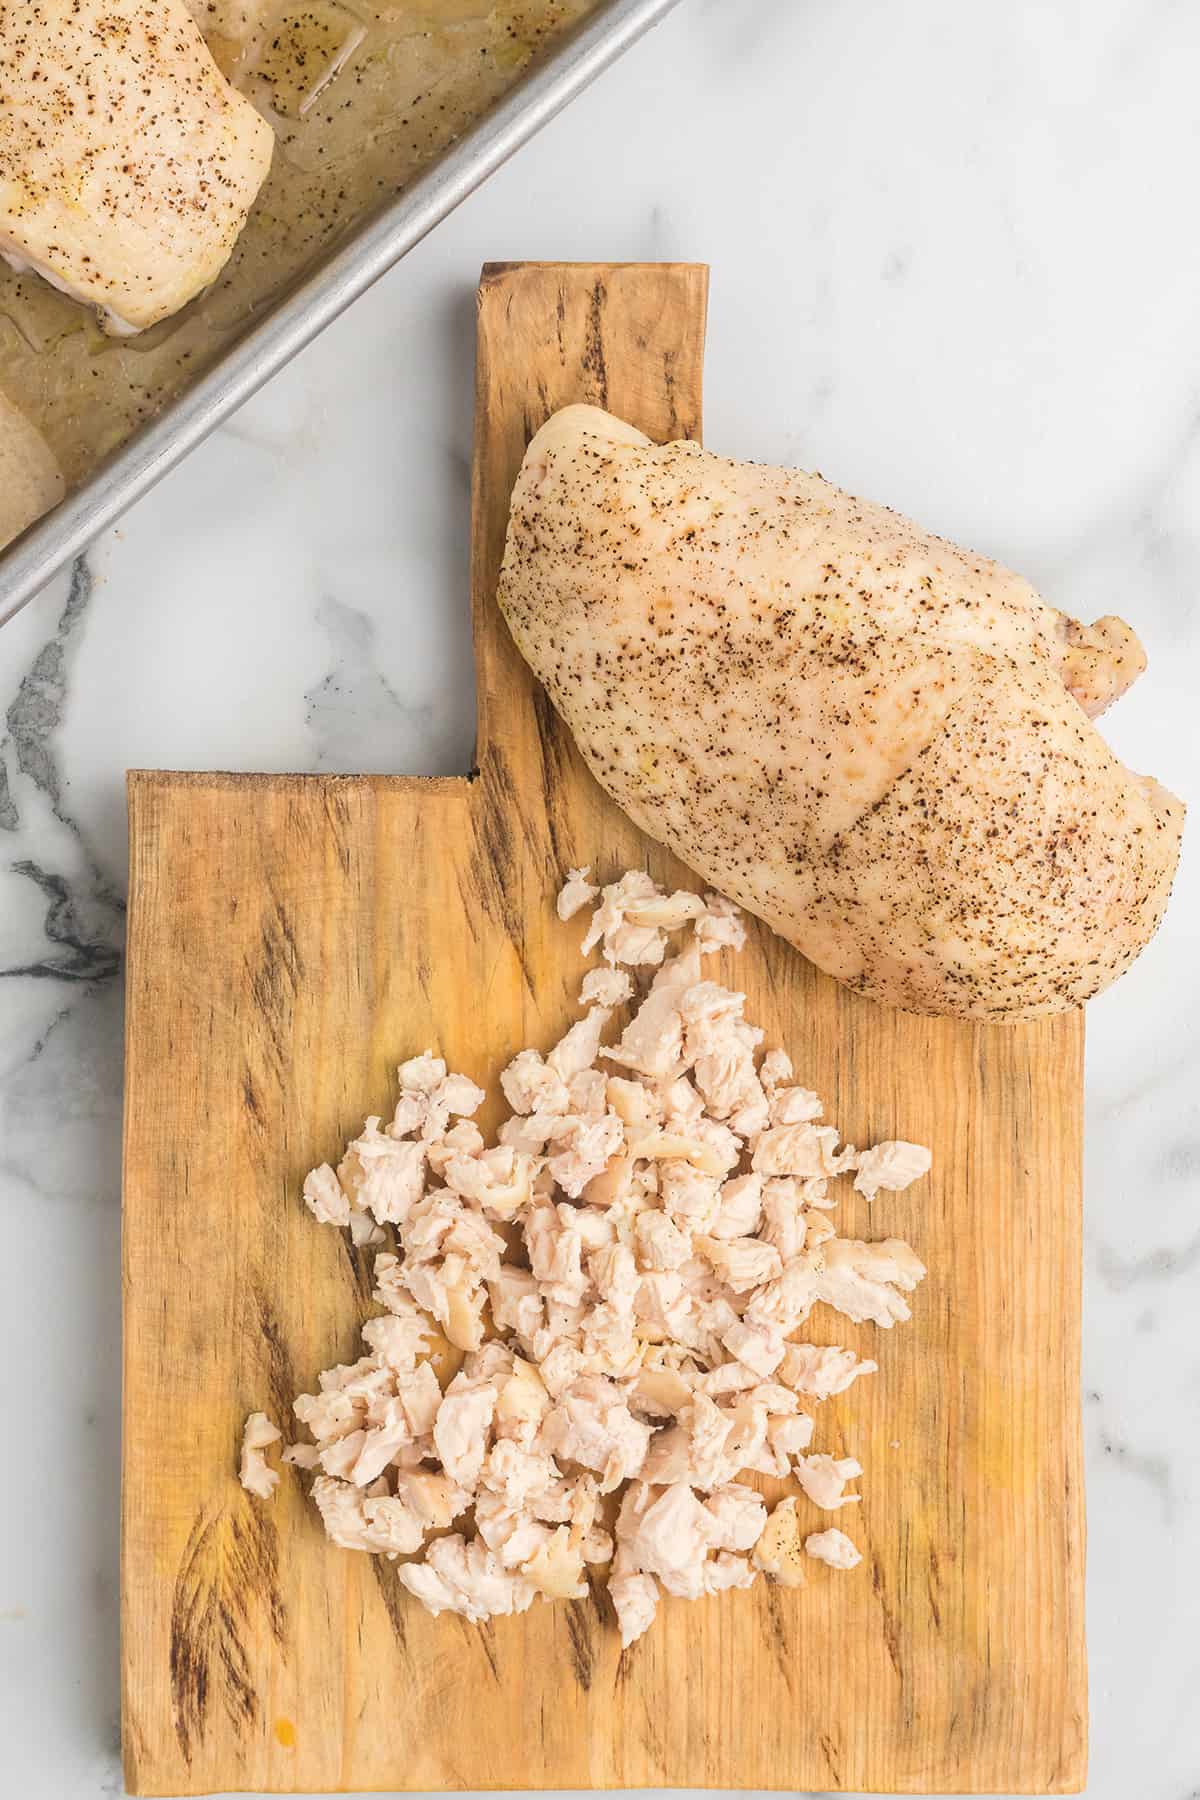 One whole chicken breasts and some chopped chicken on a cutting board.